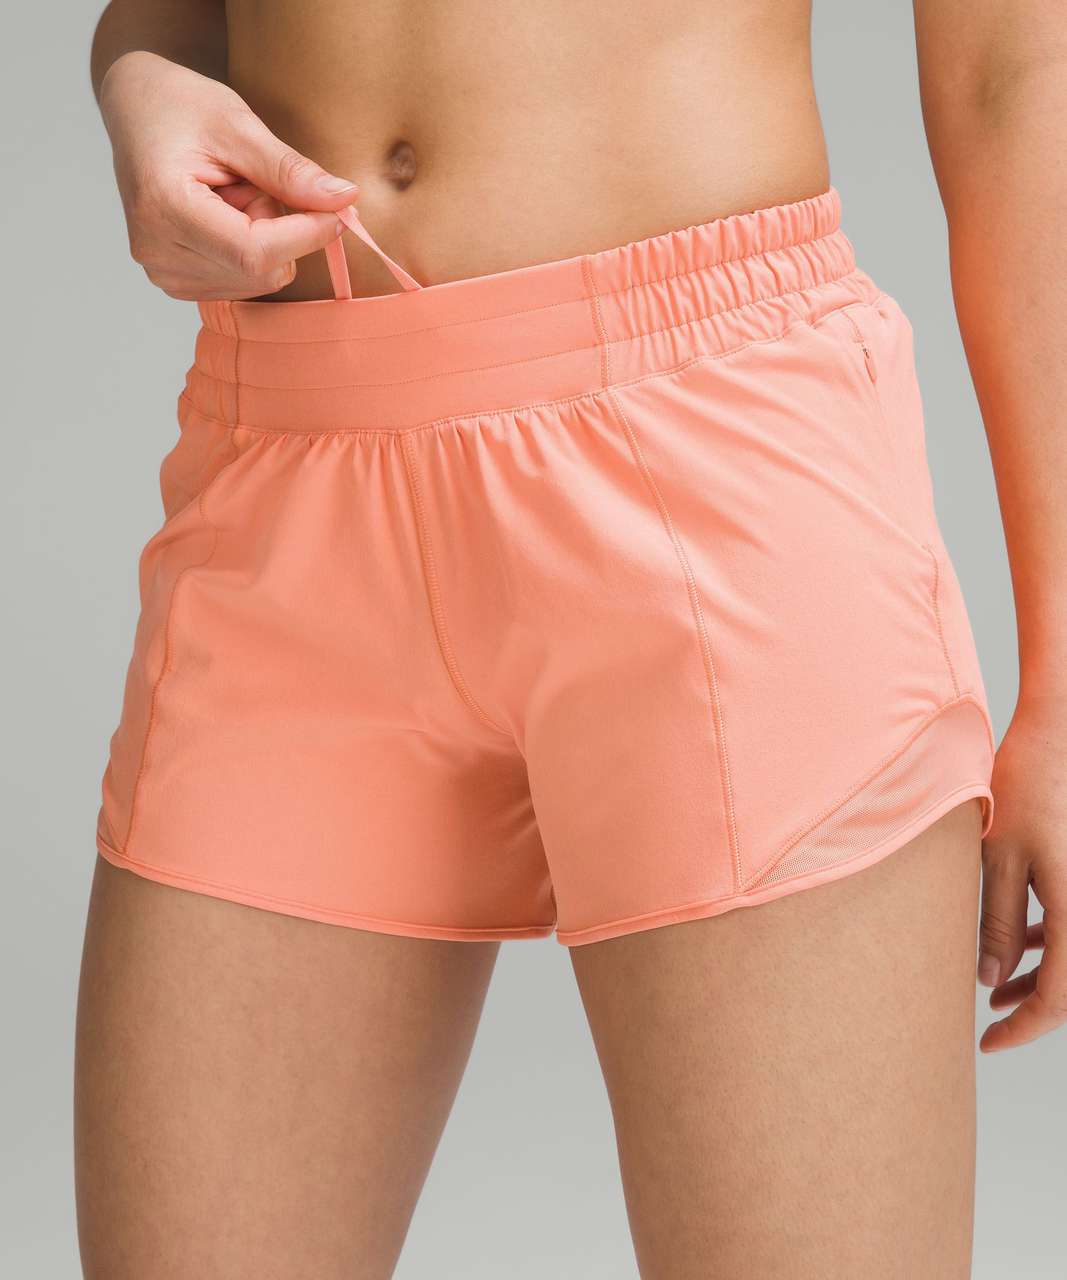 Lululemon Hotty Hot Low-Rise Lined Short 4" - Sunny Coral